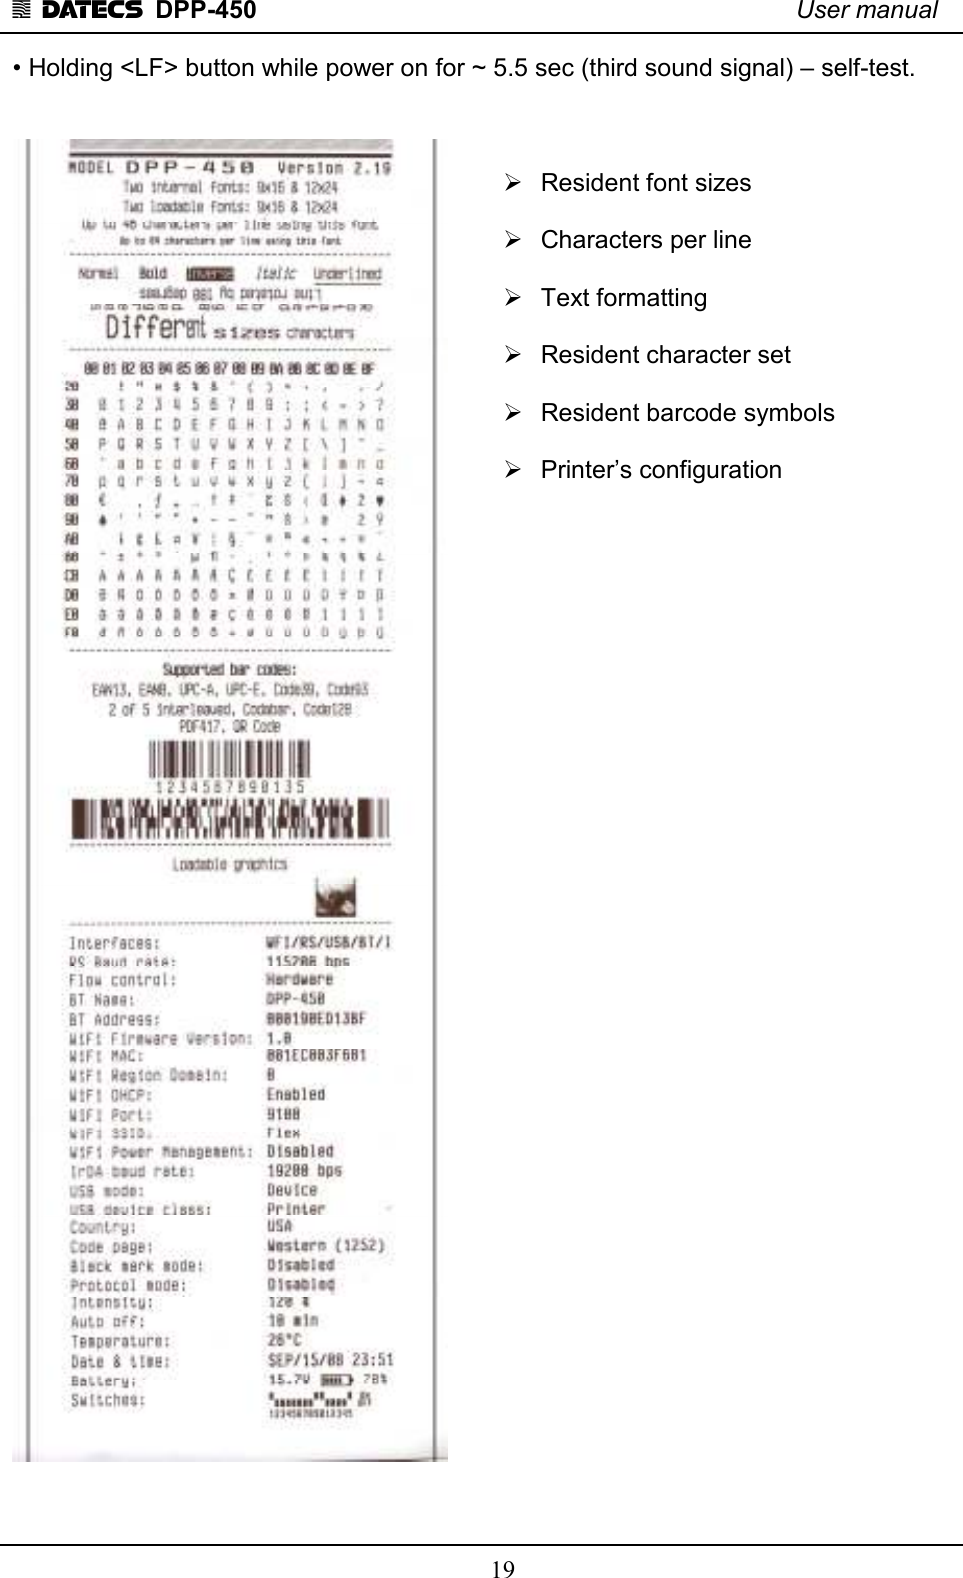 1 DATECS  DPP-450    User manual     19 • Holding &lt;LF&gt; button while power on for ~ 5.5 sec (third sound signal) – self-test.      Resident font sizes    Characters per line    Text formatting    Resident character set    Resident barcode symbols     Printer’s configuration                                     